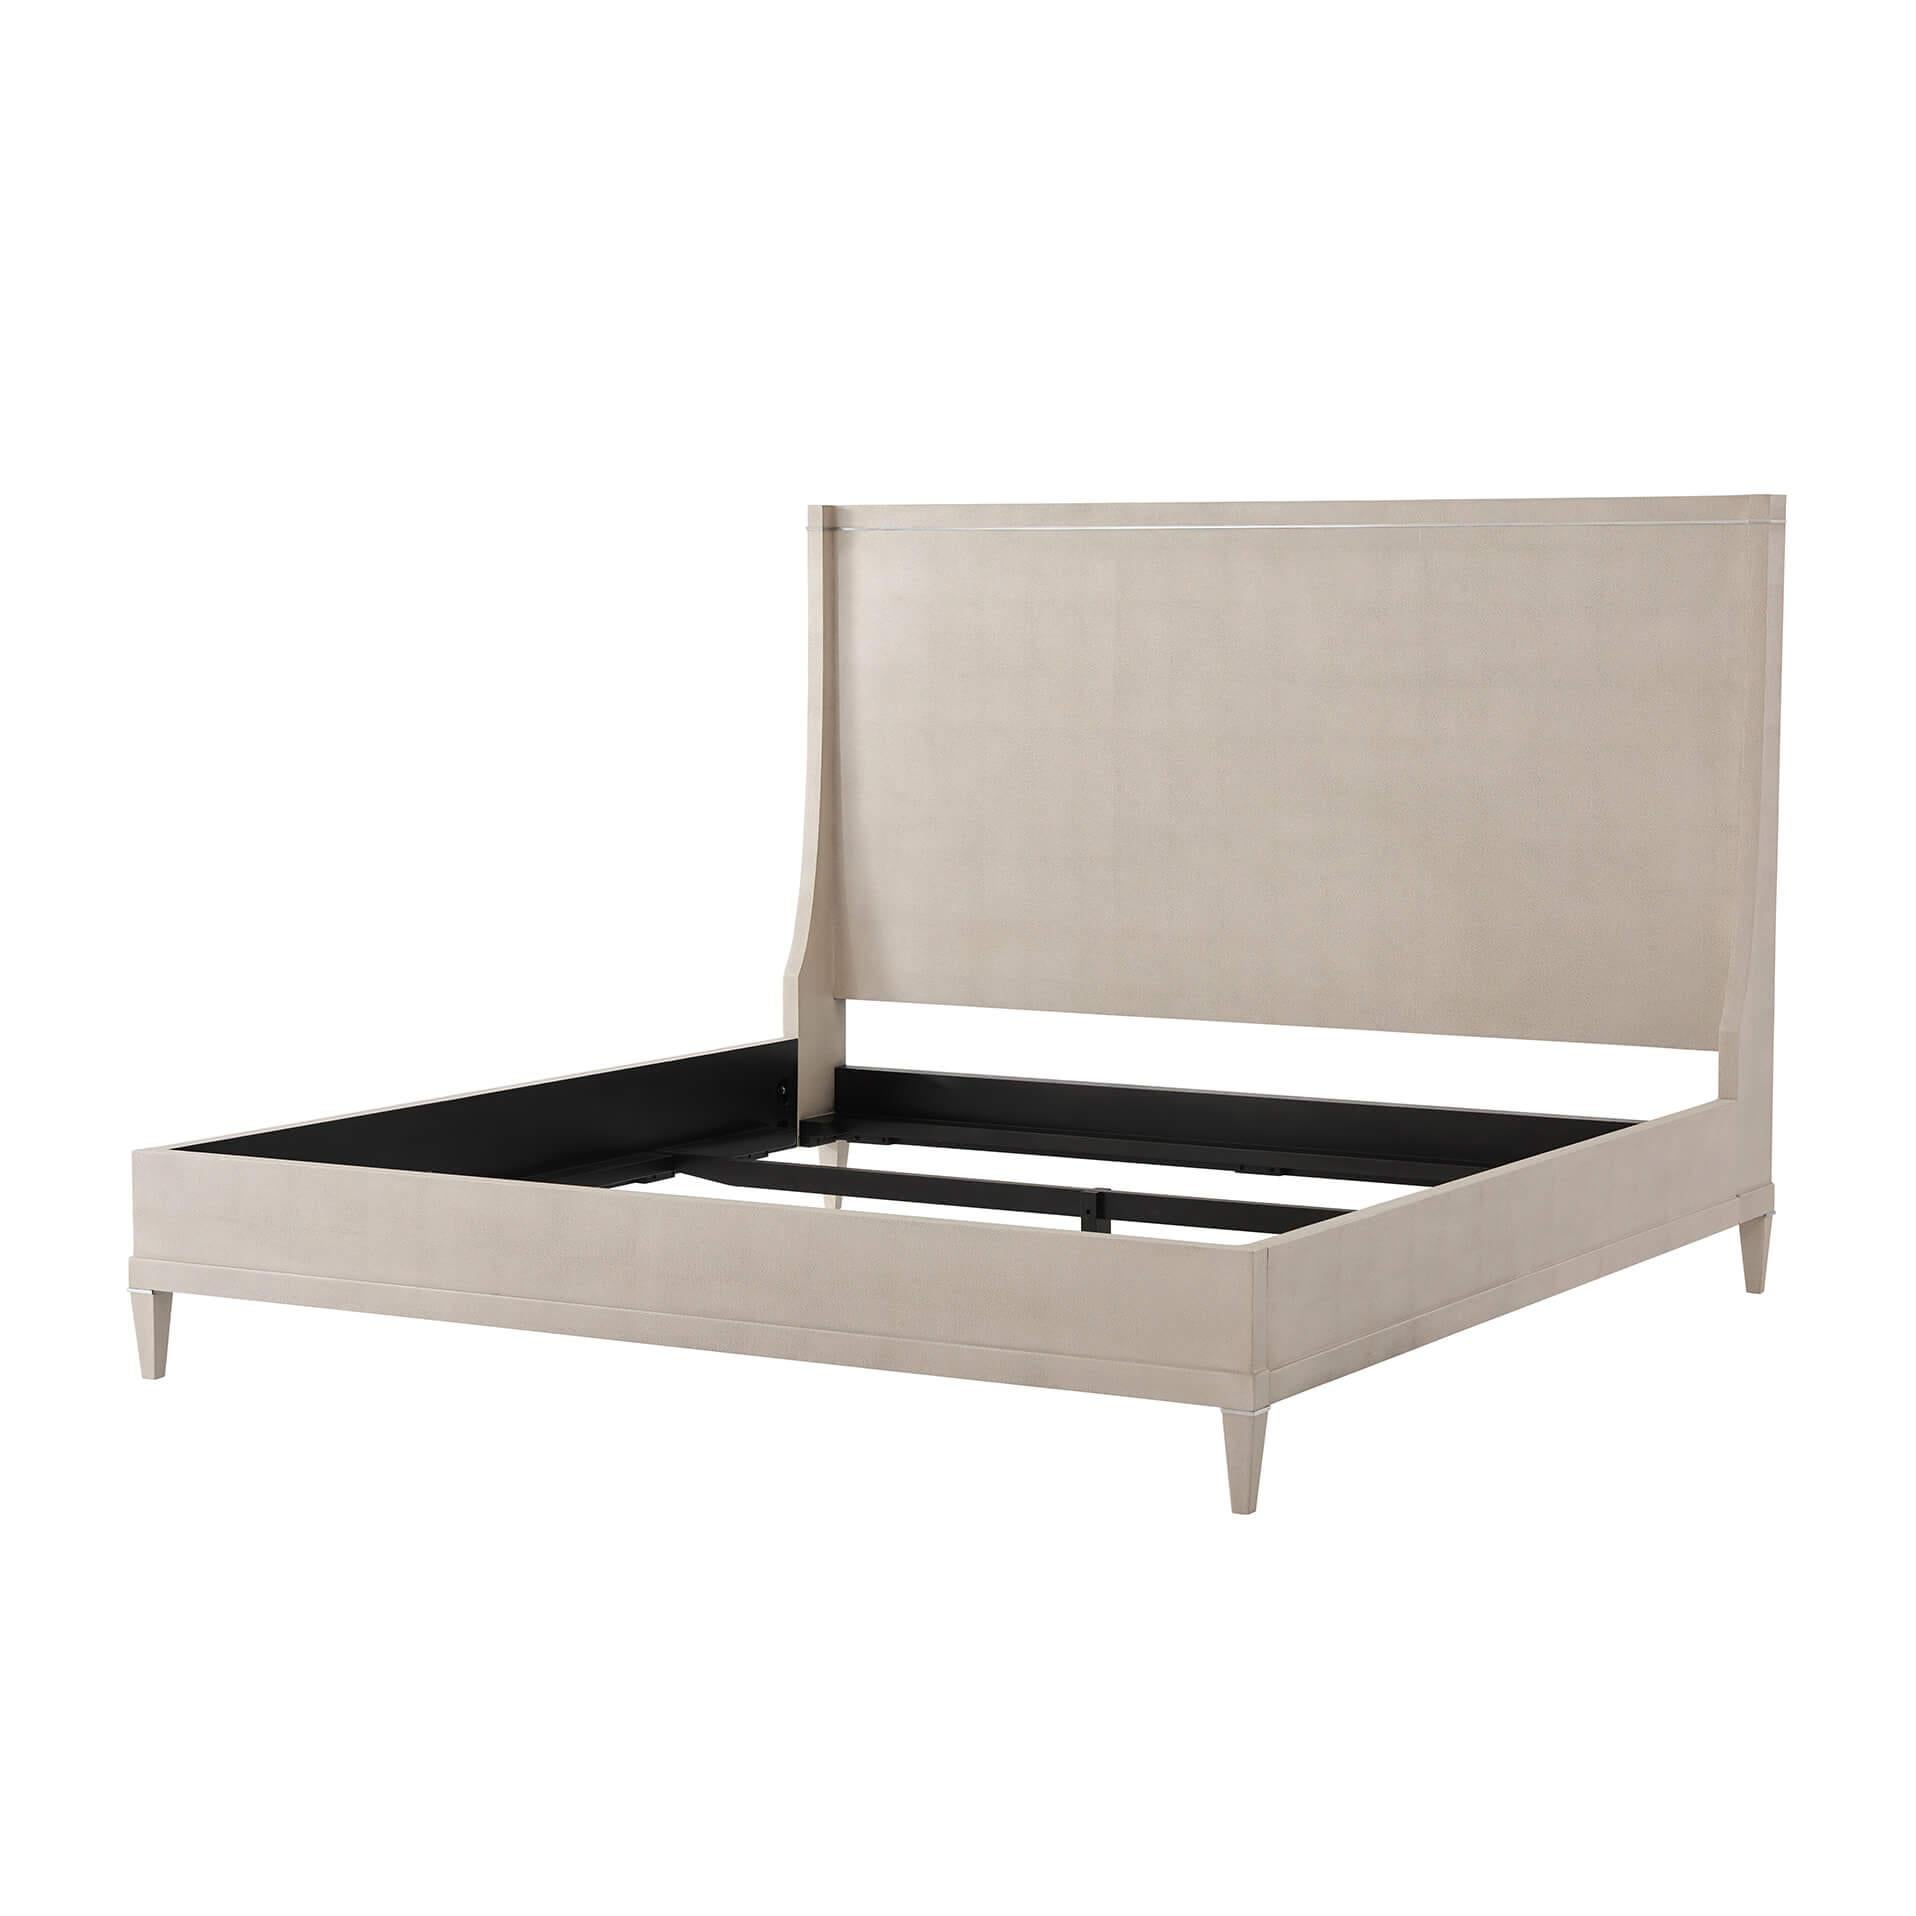 A modern embossed leather wrapped king size bed with a winged end headboard, polished nickel molding detail inlays and a stepped rail frame with square tapered legs.
Dimensions: 80.75